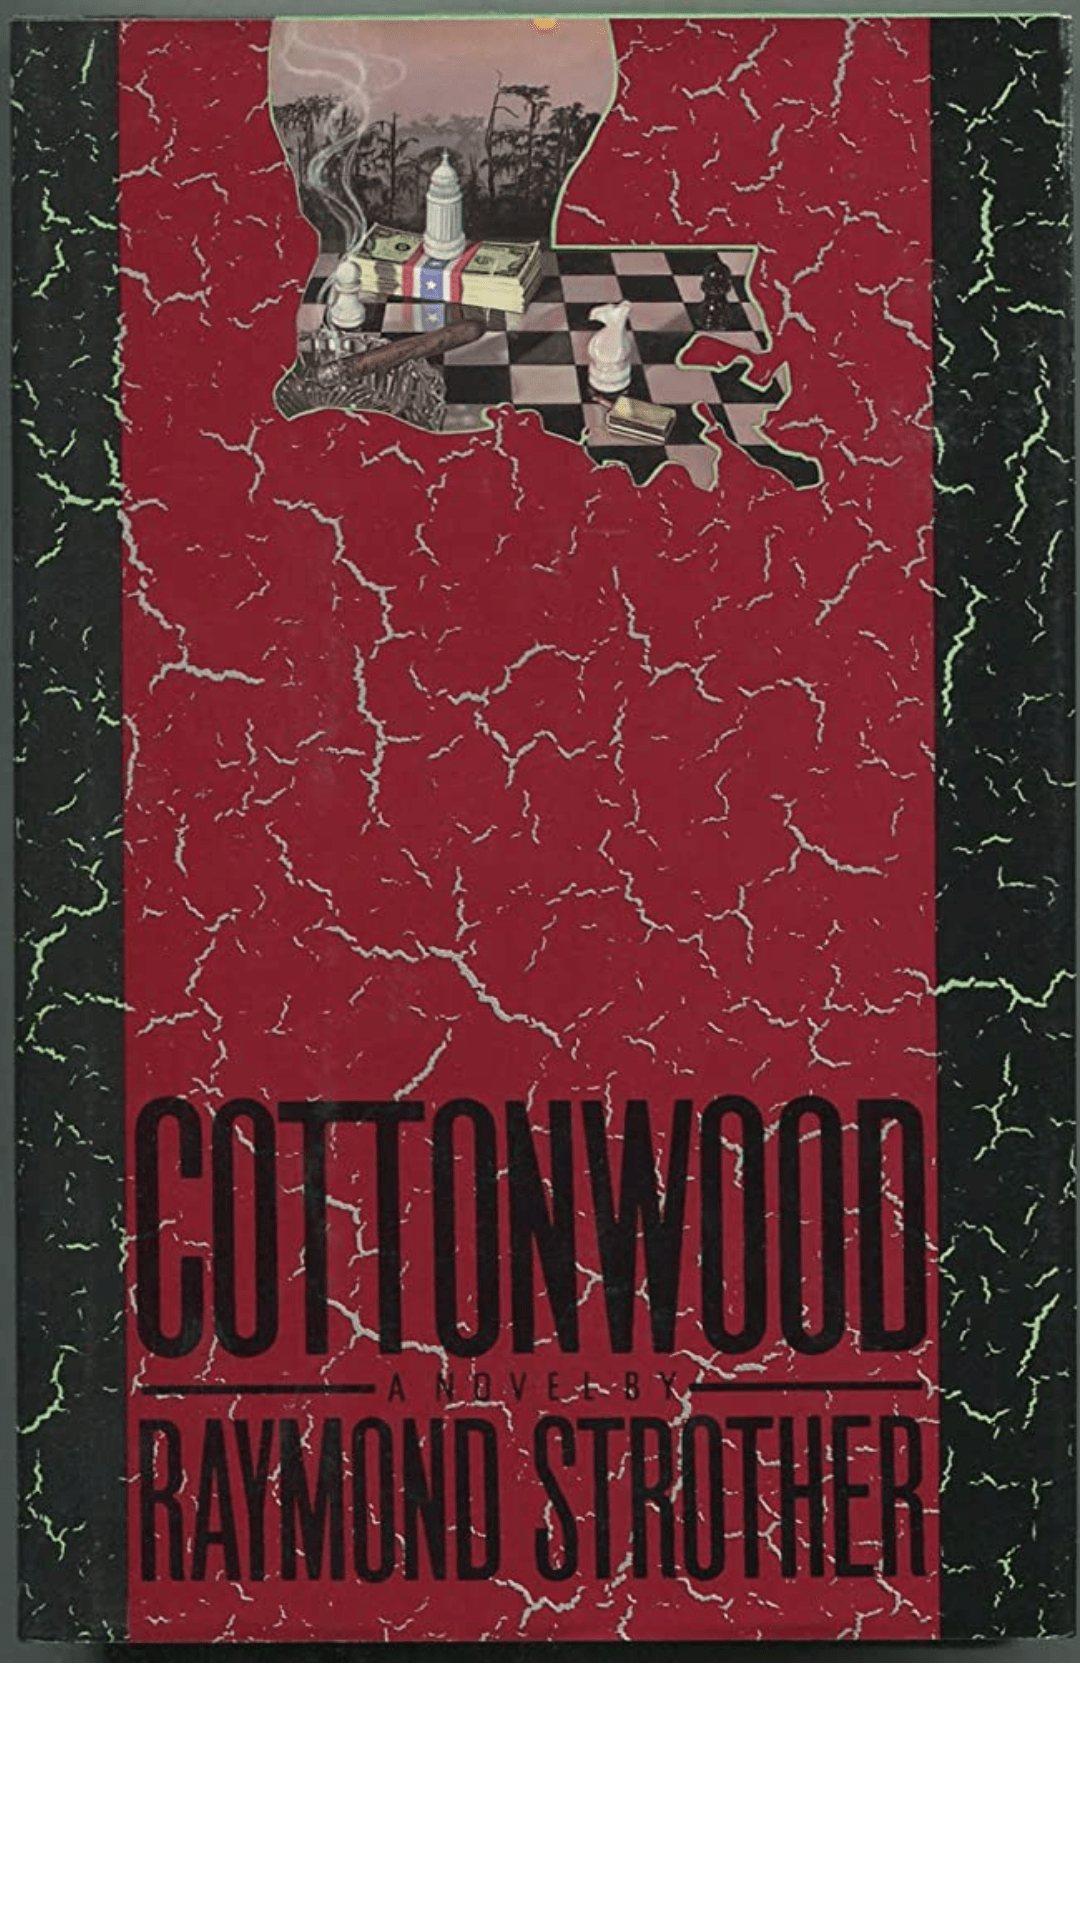 Cottonwood by Raymond Strother